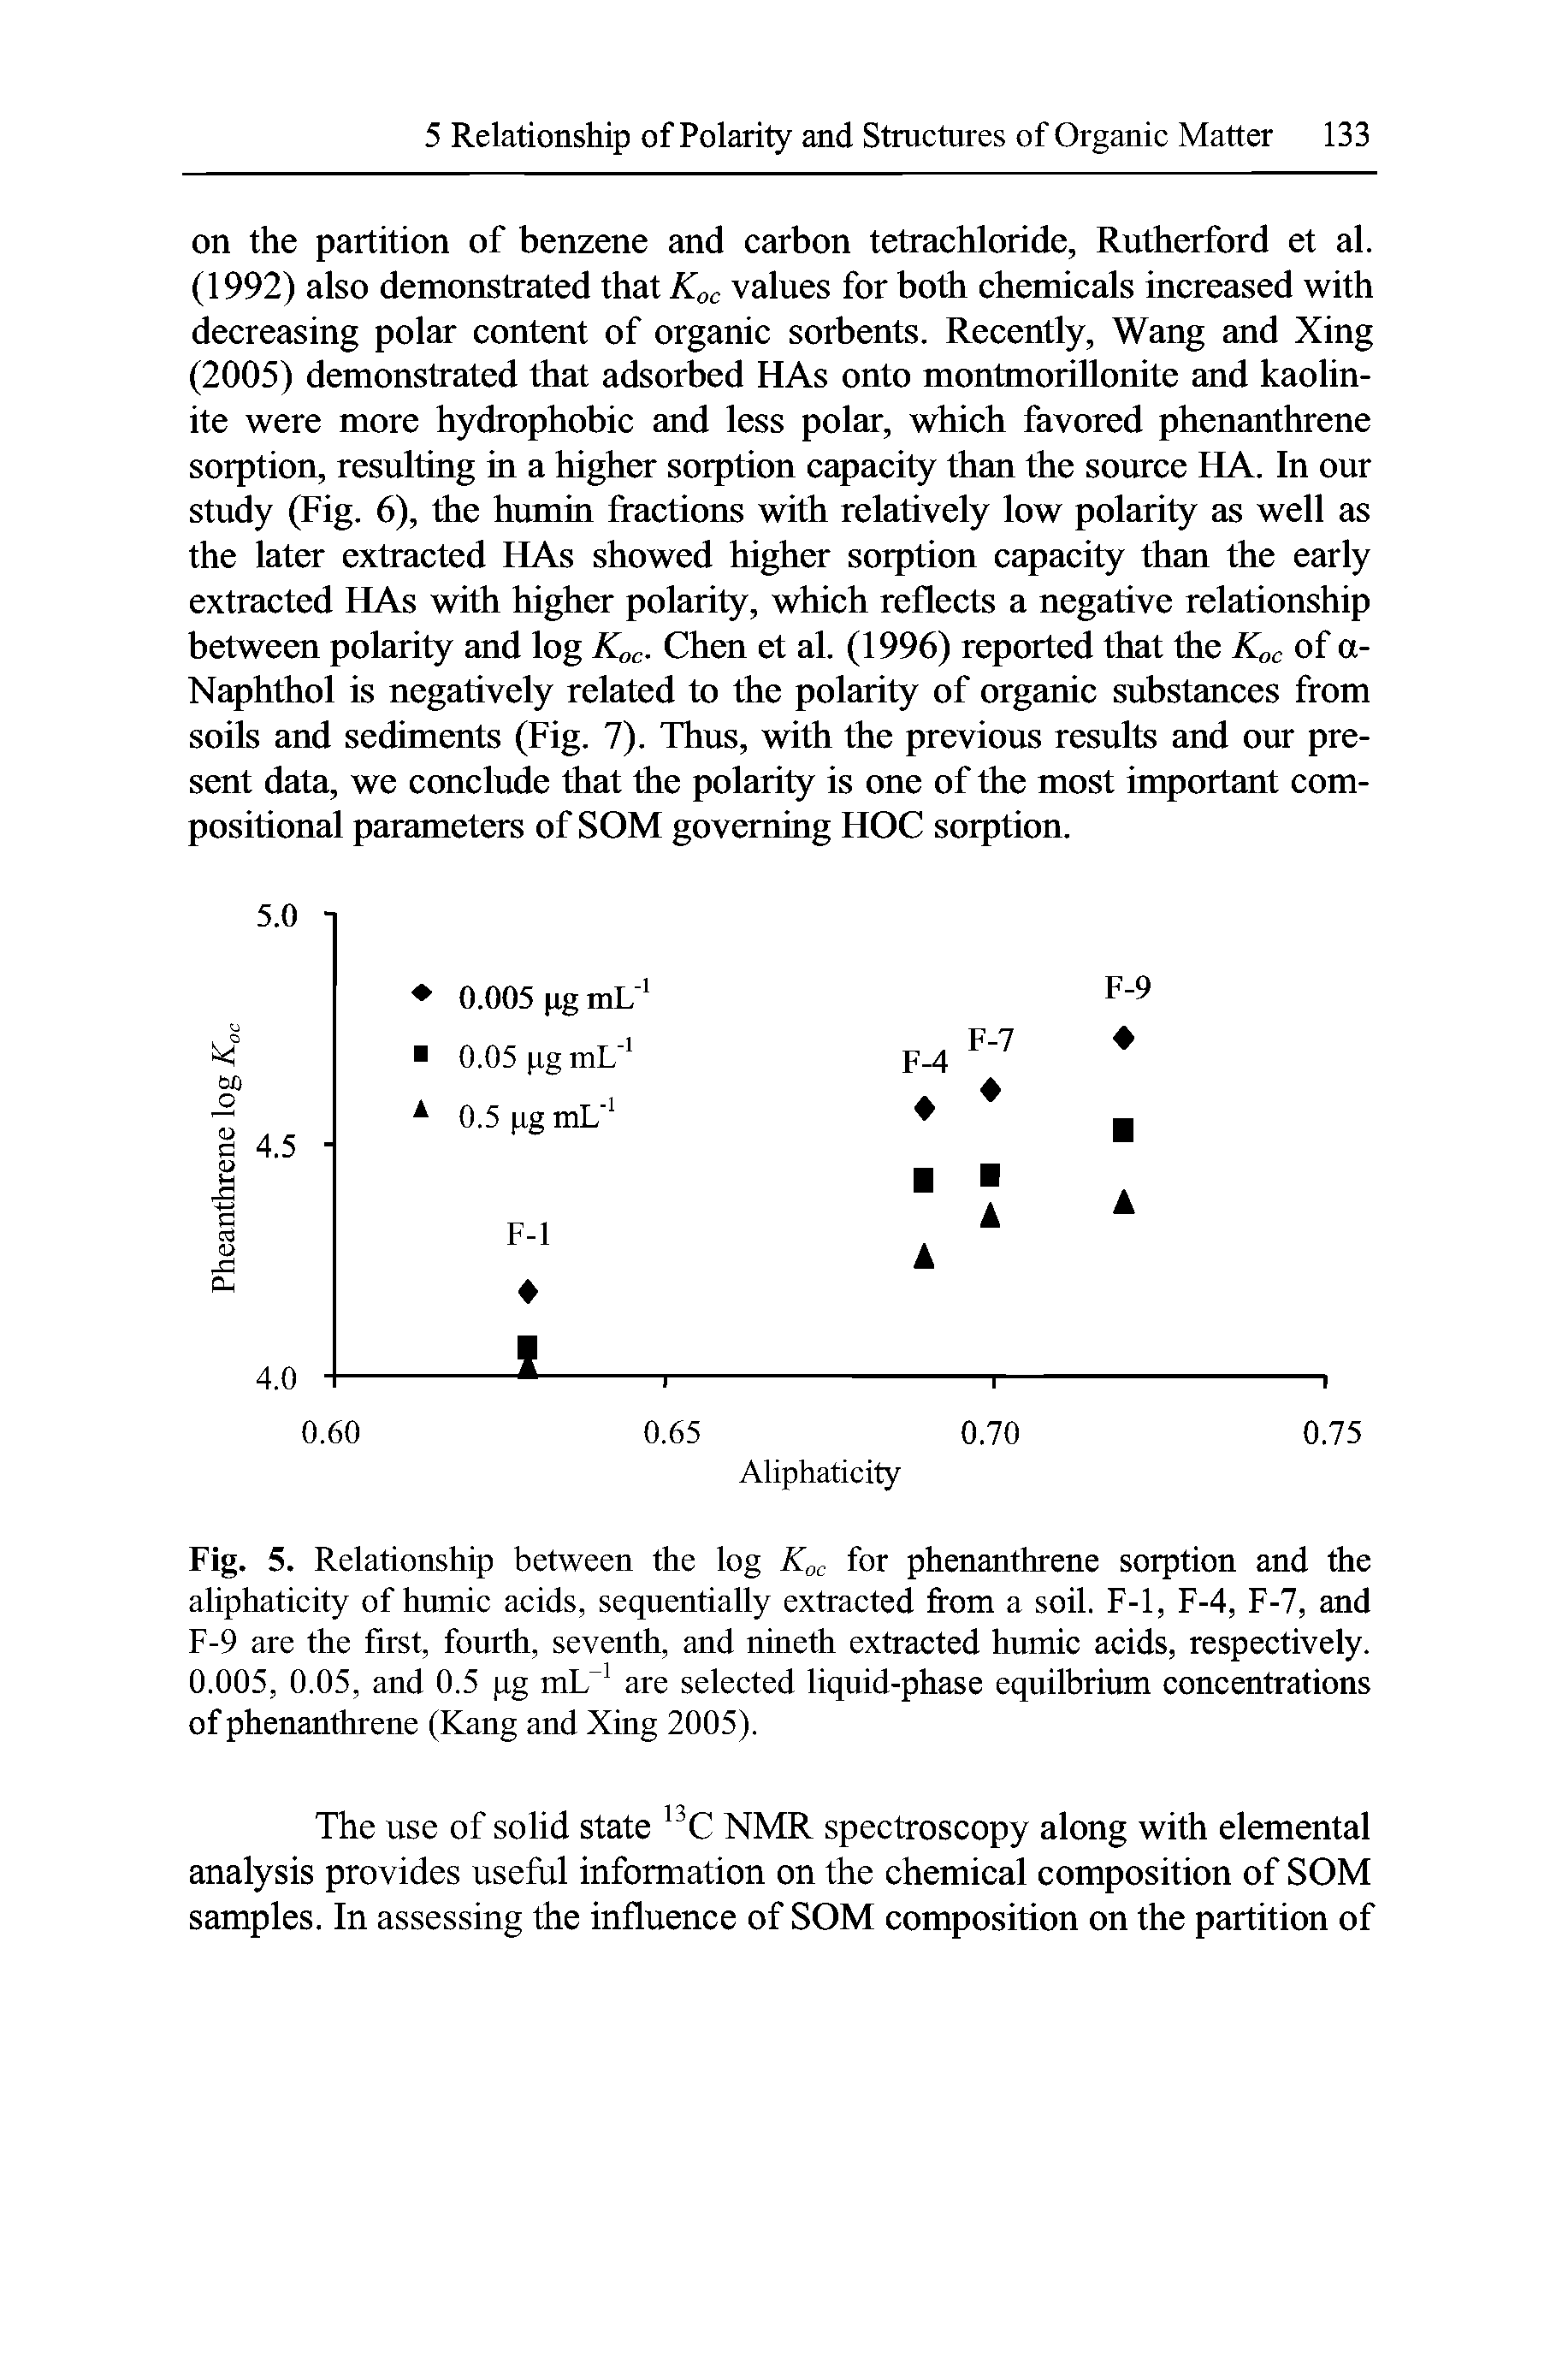 Fig. 5. Relationship between the log Koc for phenanthrene sorption and the aliphaticity of humic acids, sequentially extracted from a soil. F-l, F-4, F-7, and F-9 are the first, fourth, seventh, and nineth extracted humic acids, respectively. 0.005, 0.05, and 0.5 pg mL are selected liquid-phase equilbrium concentrations of phenanthrene (Kang and Xing 2005).